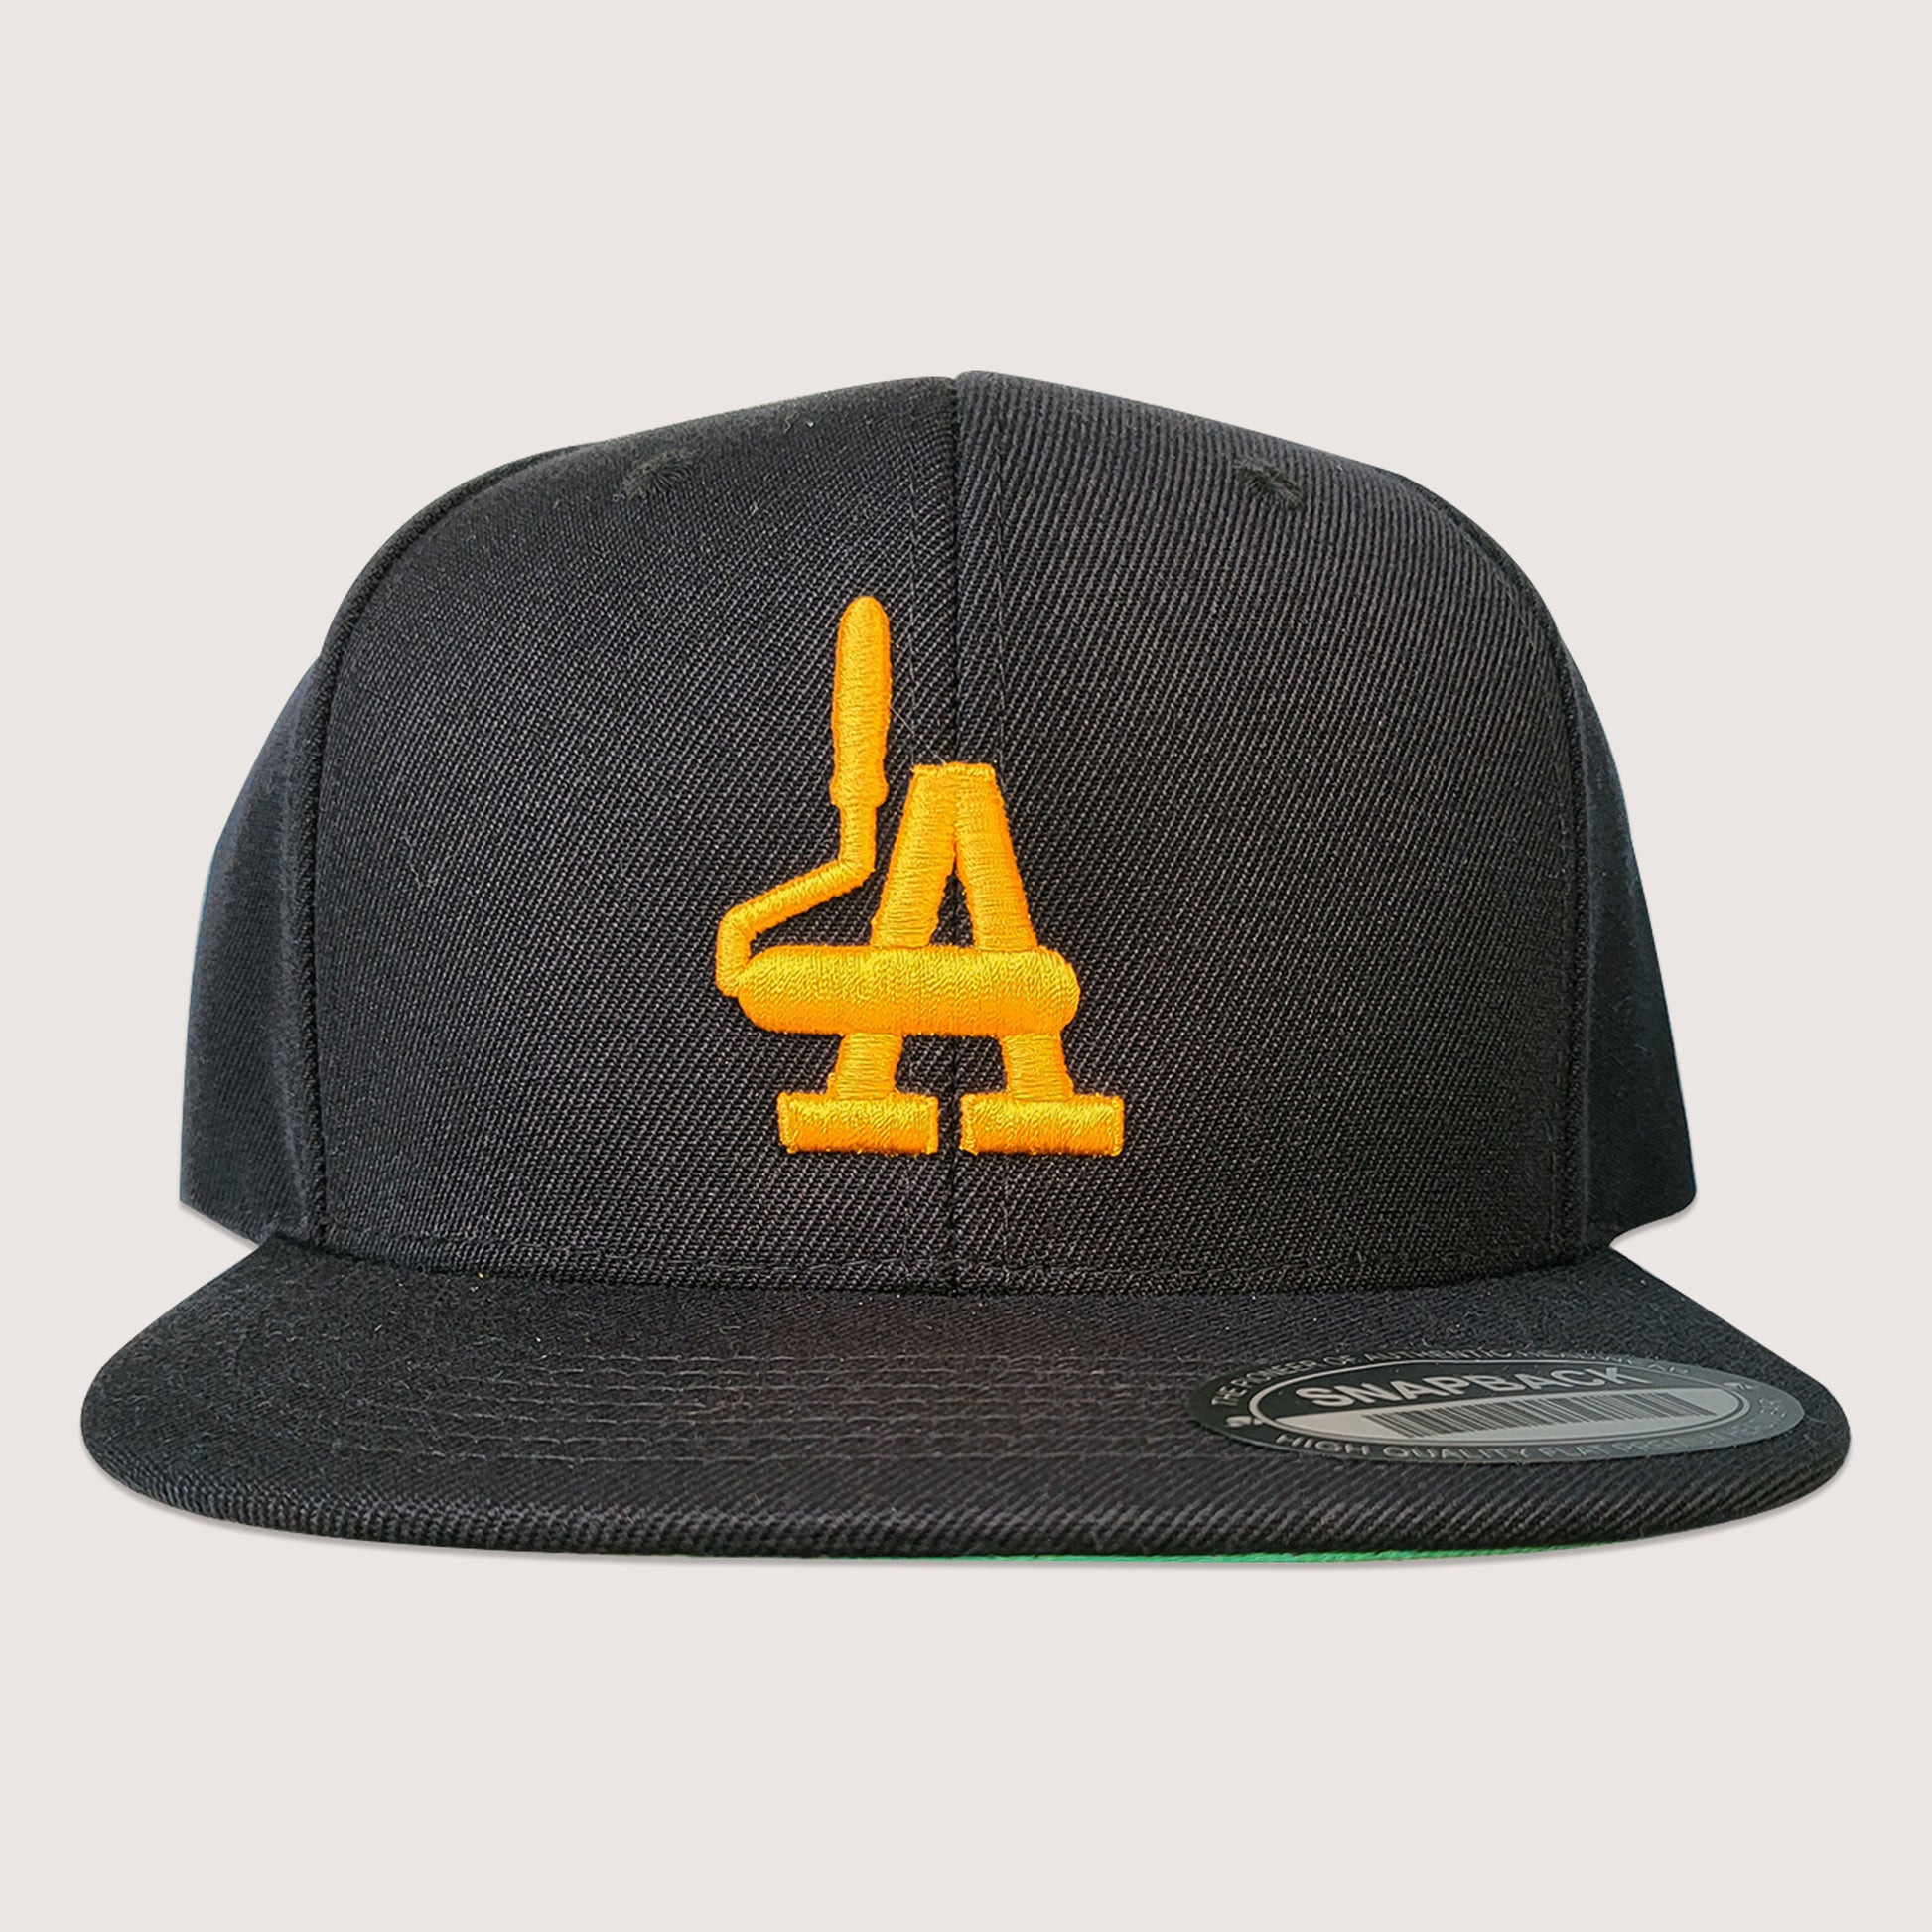 Phatcaps brand baseball cap in black with gold embroidery